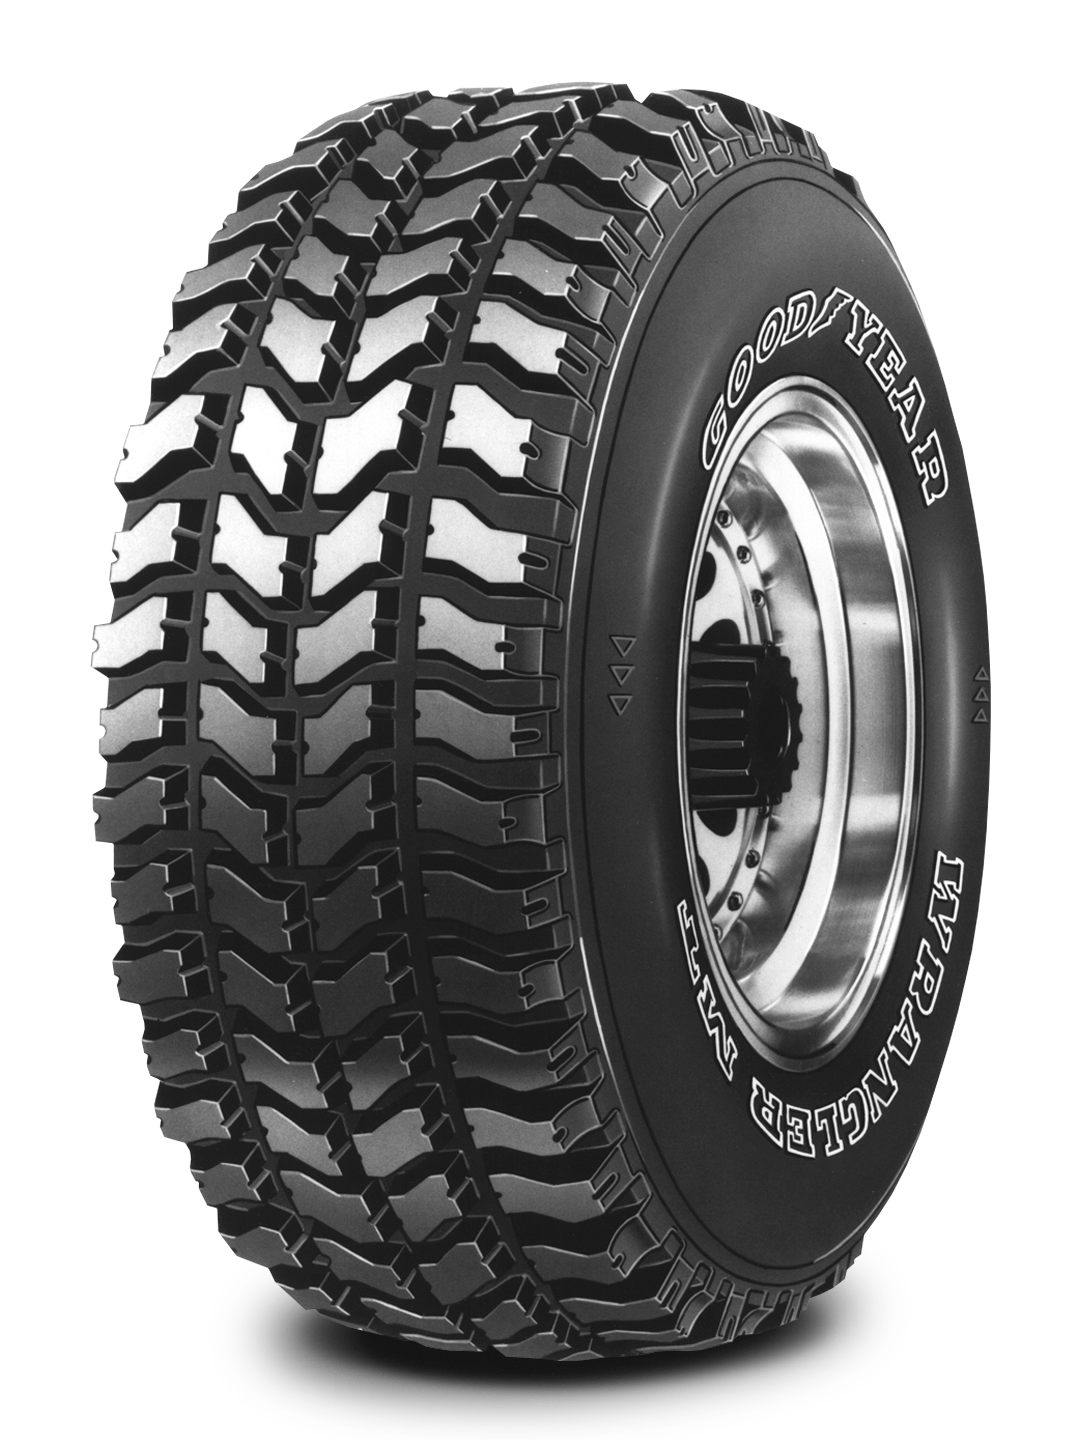 Military Tires | Goodyear Government Sales